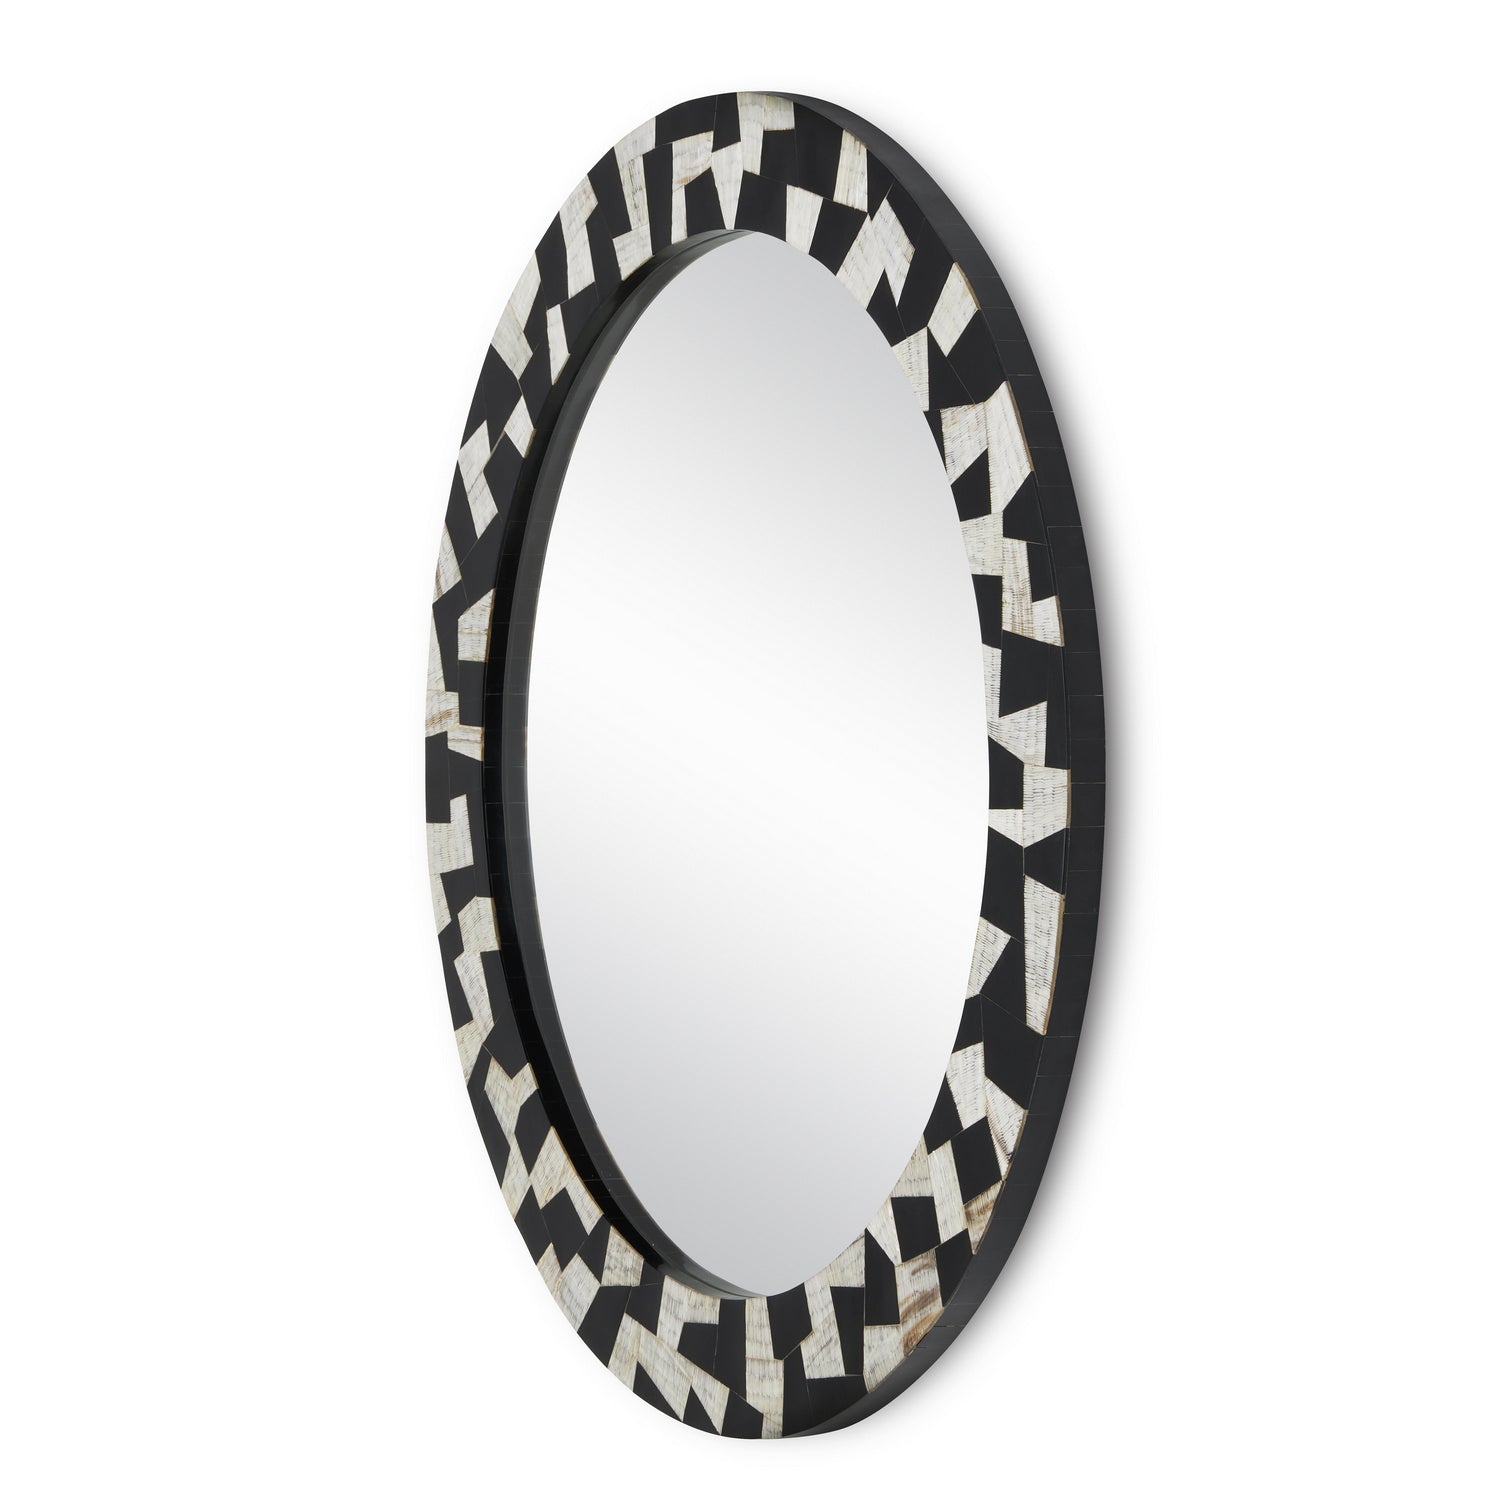 Mirror from the Bindu collection in Black/Natural/Mirror finish